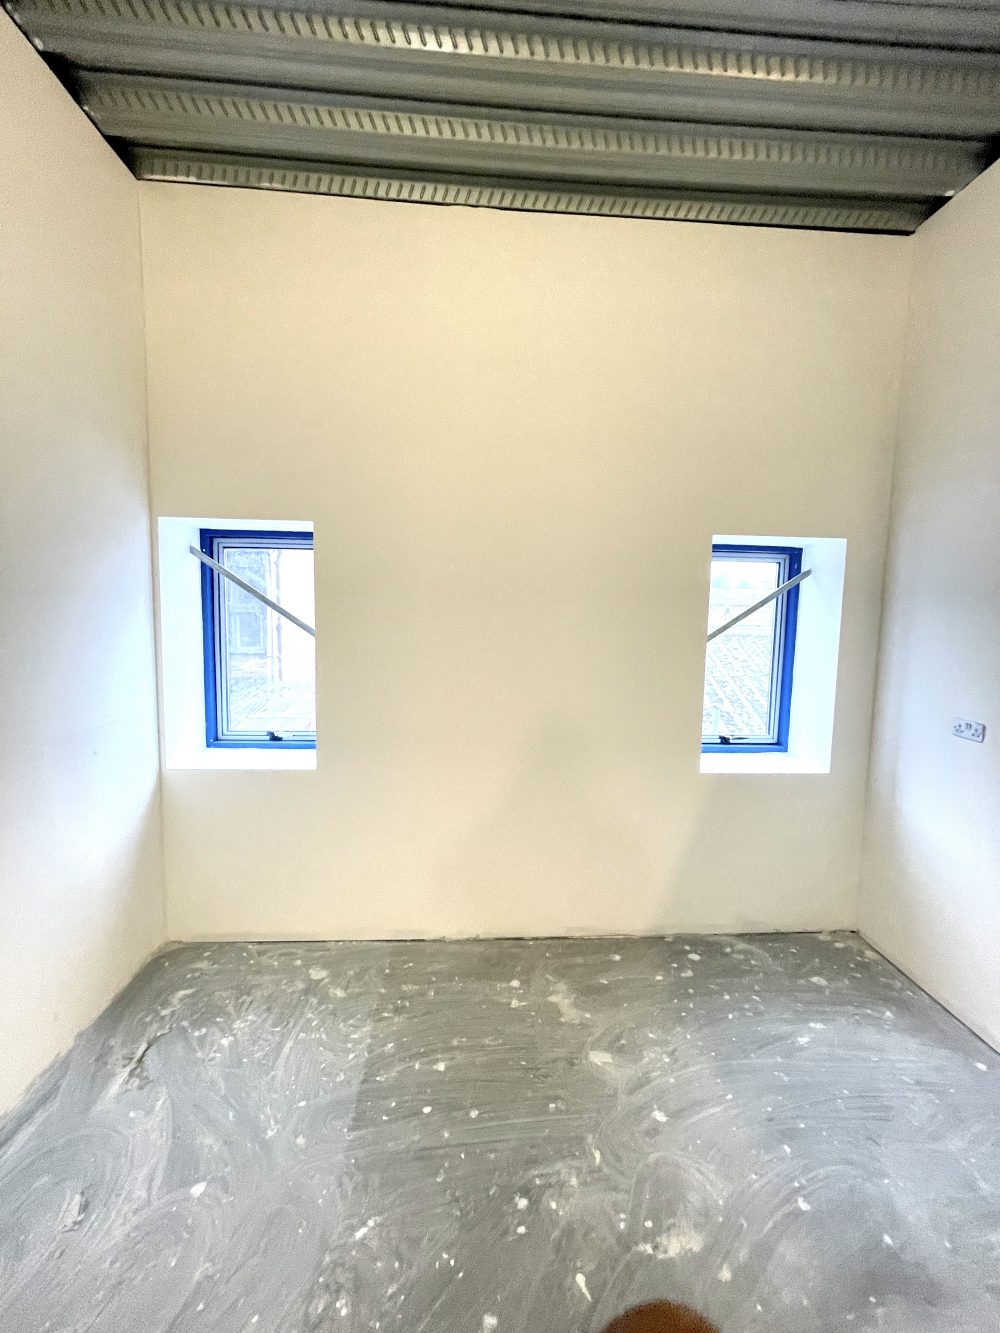 First floor office space : light idustrial creative artist studio to rent in E18 S South Woodford Pic 8